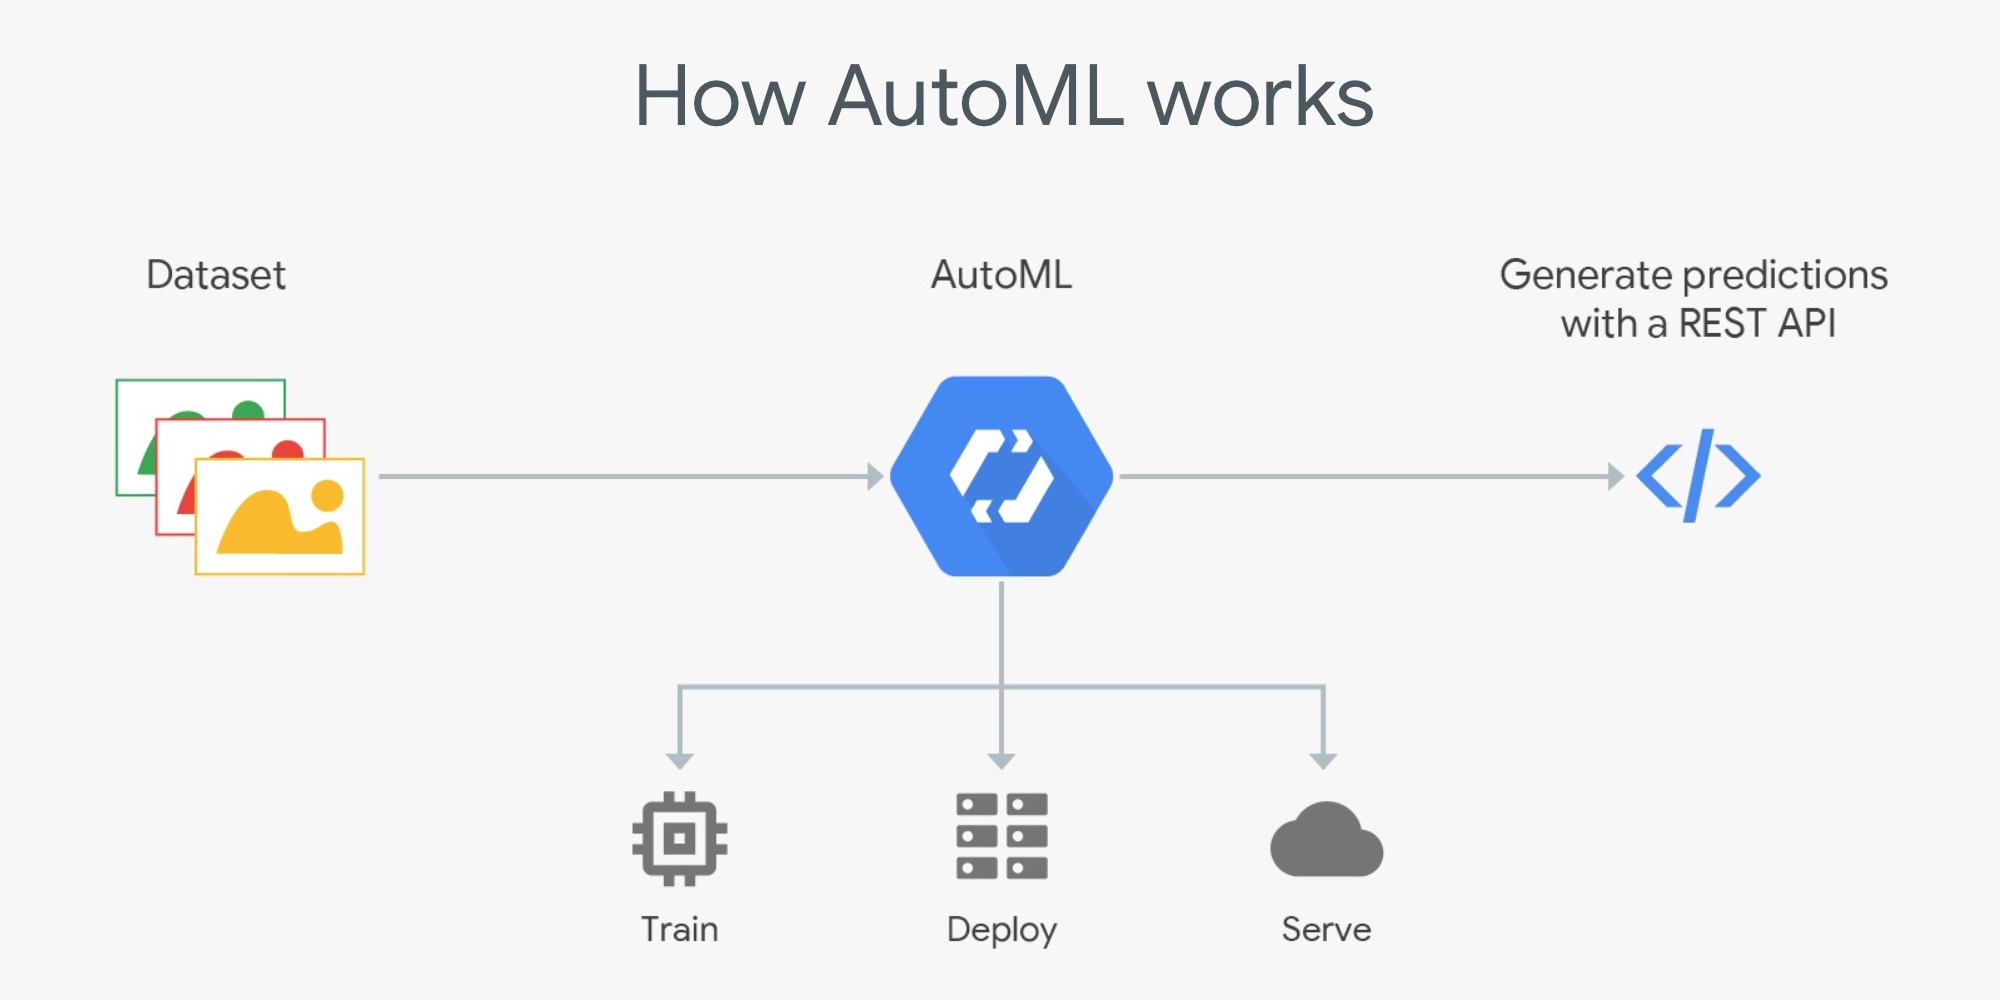 An image illustrating how AutoML works.